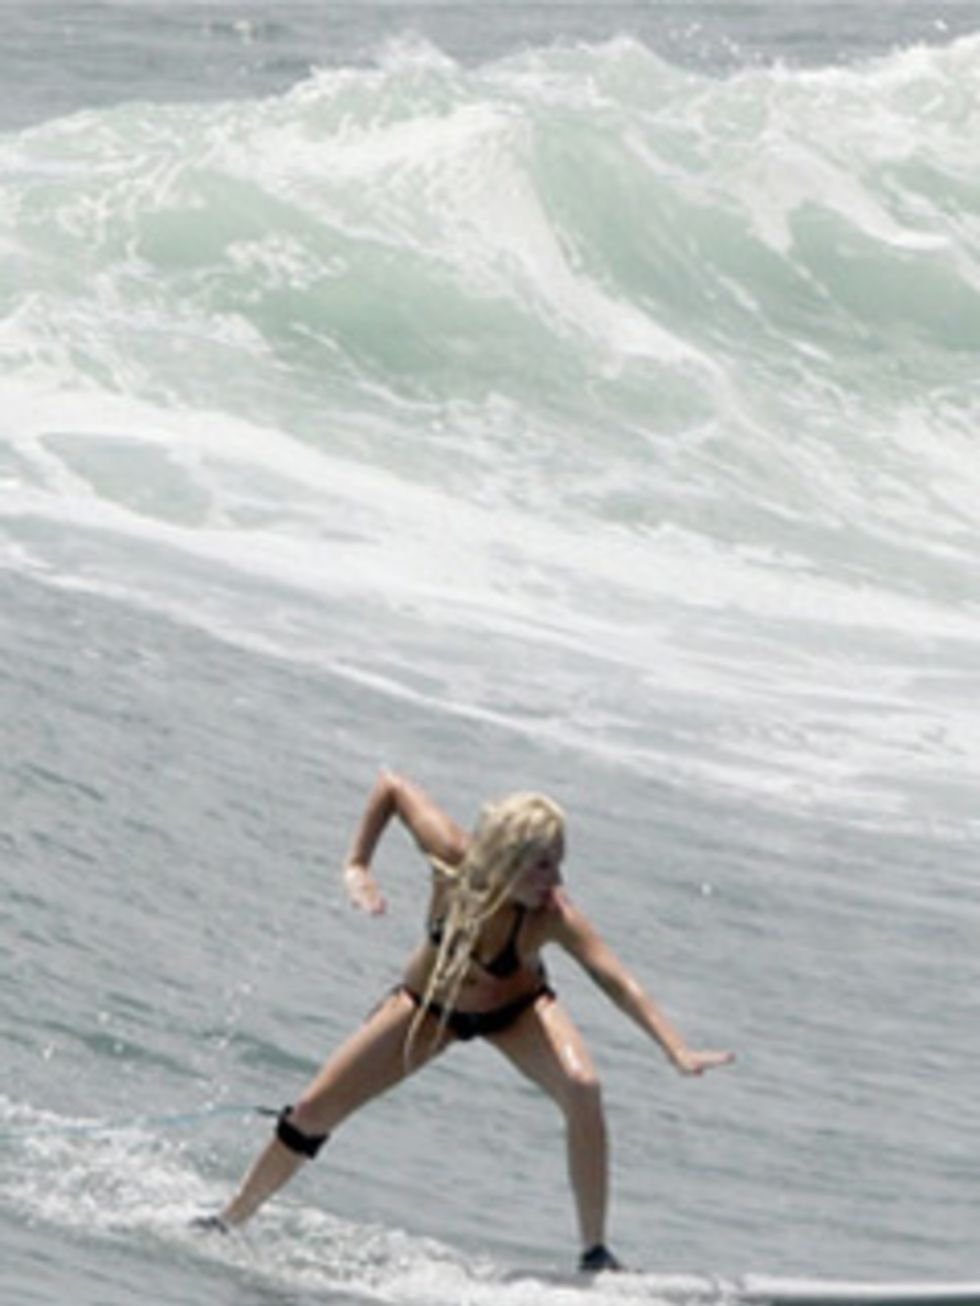 <p>Lady Gaga was spotted surfing in Mexico last week, and although she's busting out some pretty professional looking moves it was apparently her first time! Surfing is a great all-over workout - toning legs and core, while burning plenty of calories. Oh,